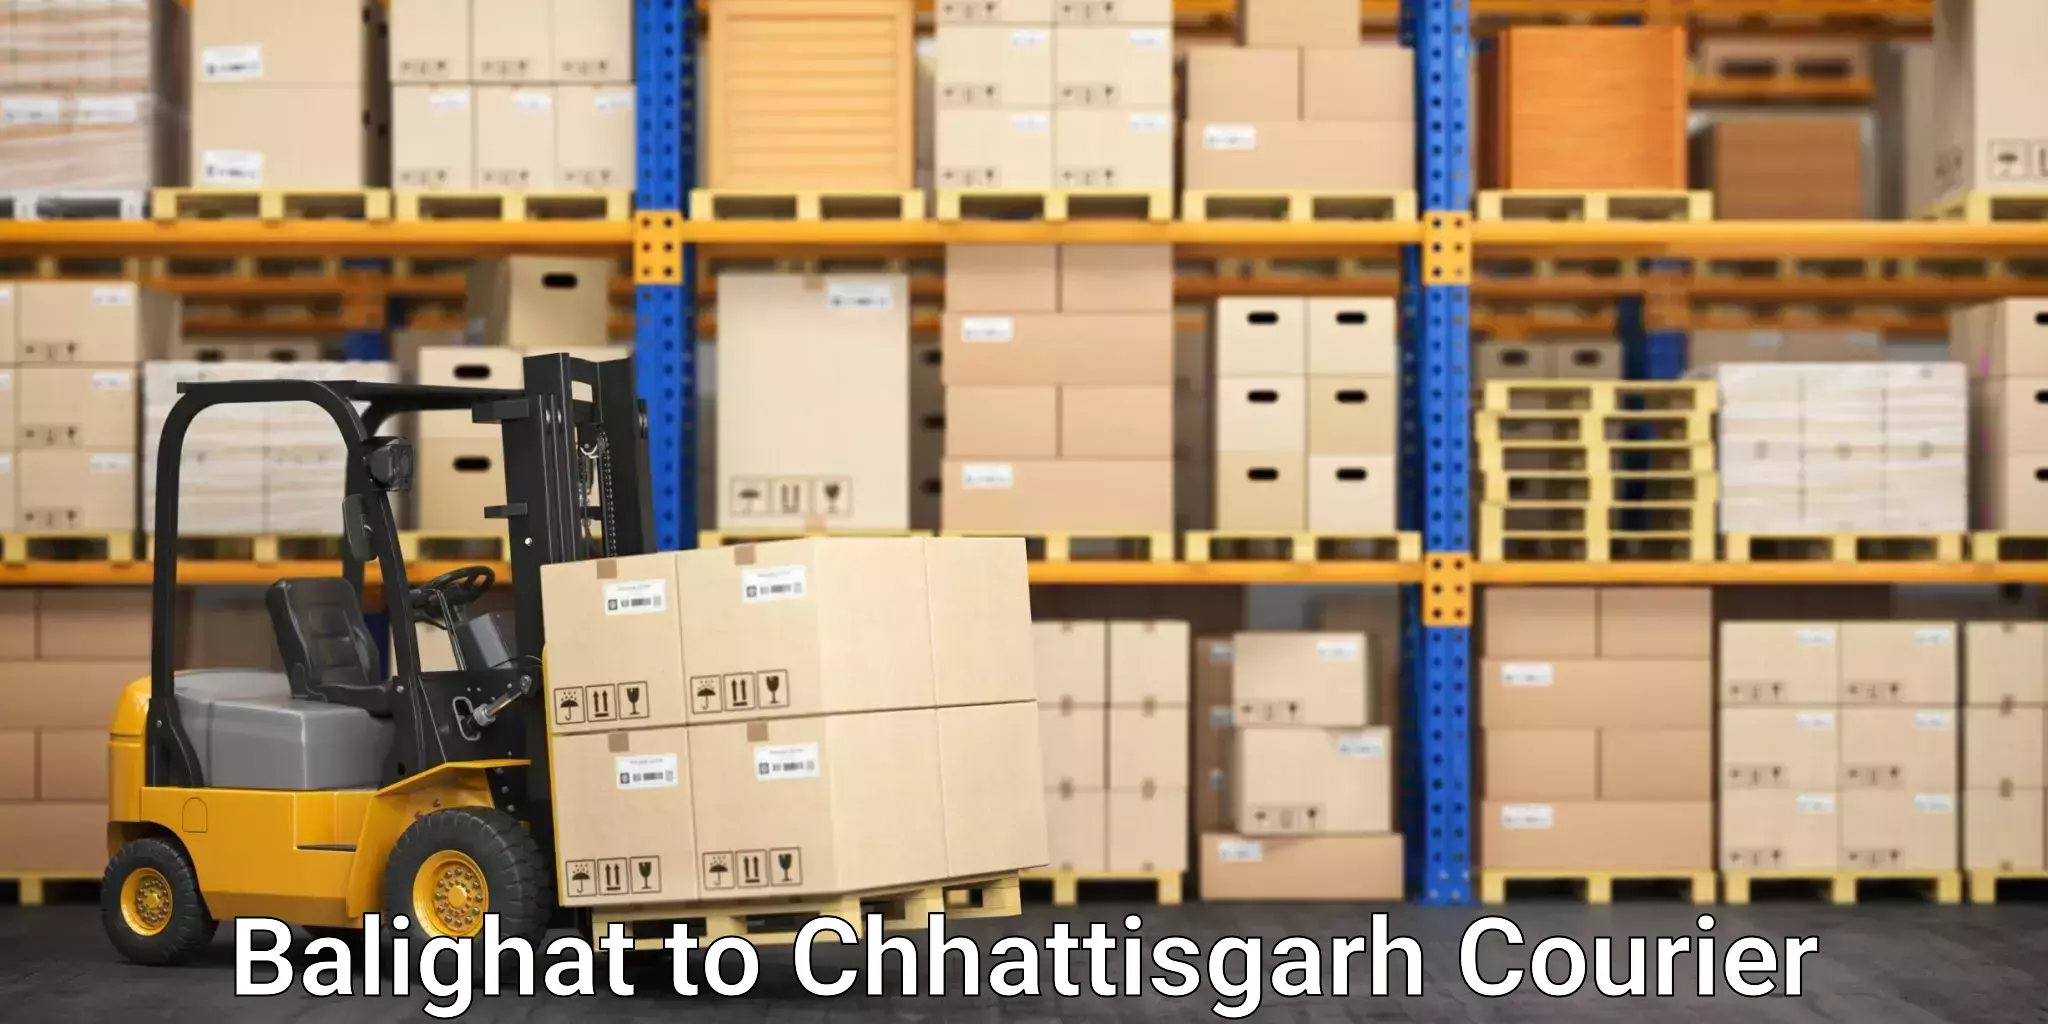 Expedited shipping methods Balighat to Bilaspur